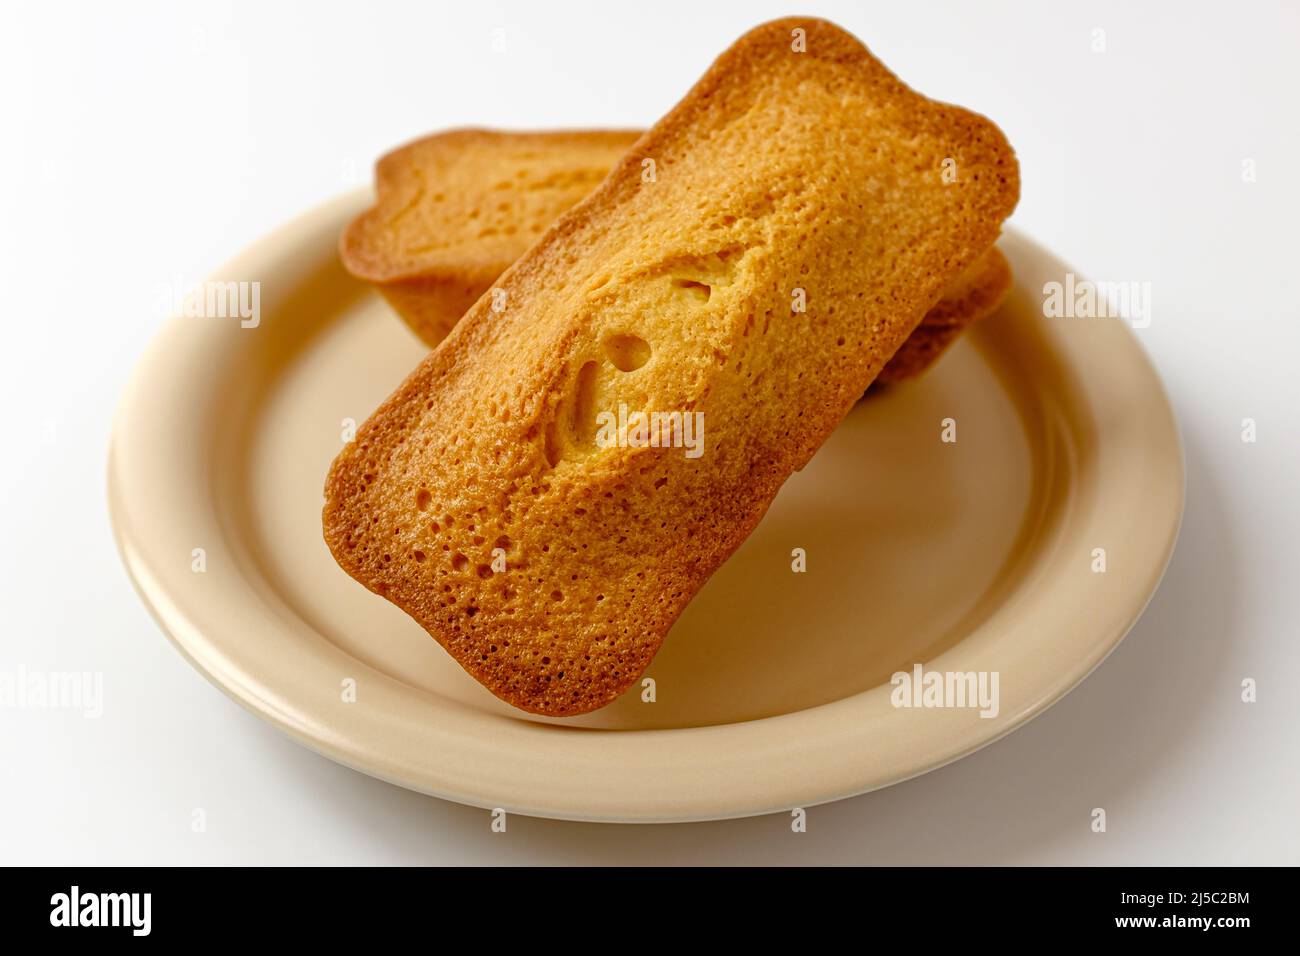 french food culture. sweet and savory bread. gold bullion bread Stock Photo